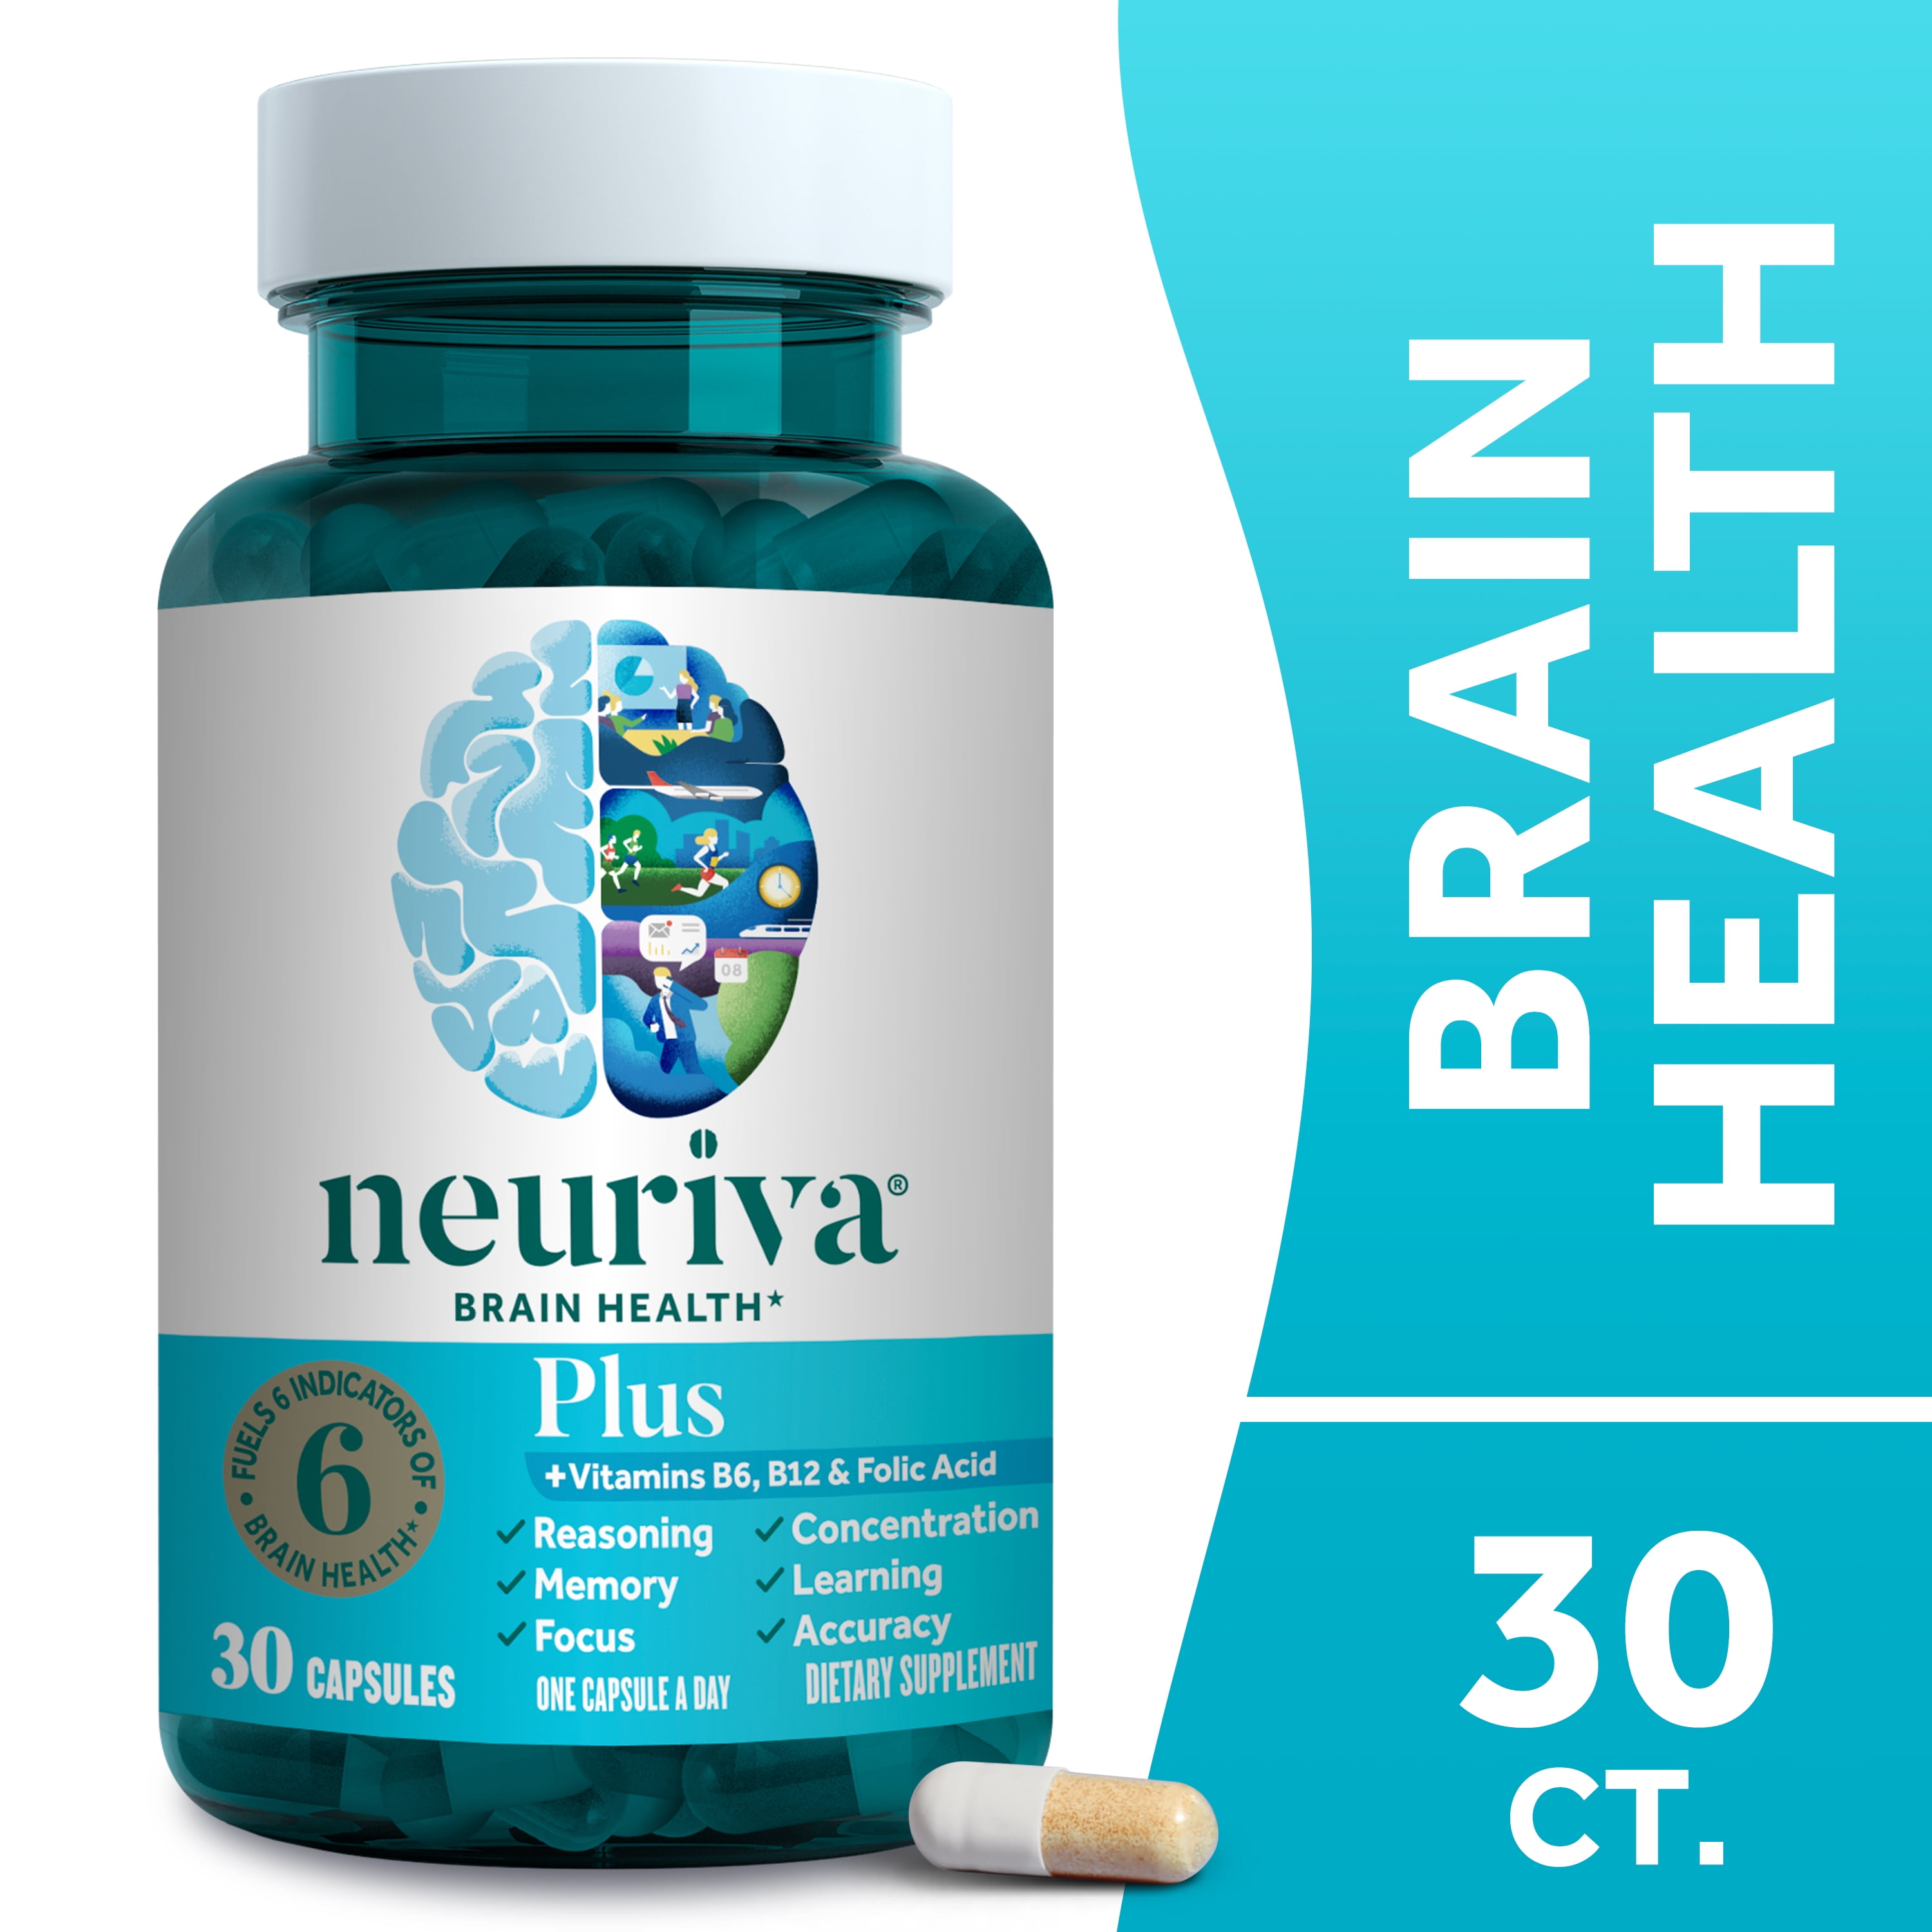 Neuriva Original Brain Health Supplement (30 count), Brain Support With  Clinically Tested Natural Ingredients (Coffee Cherry & Plant Sourced  Phosphatidylserine) 